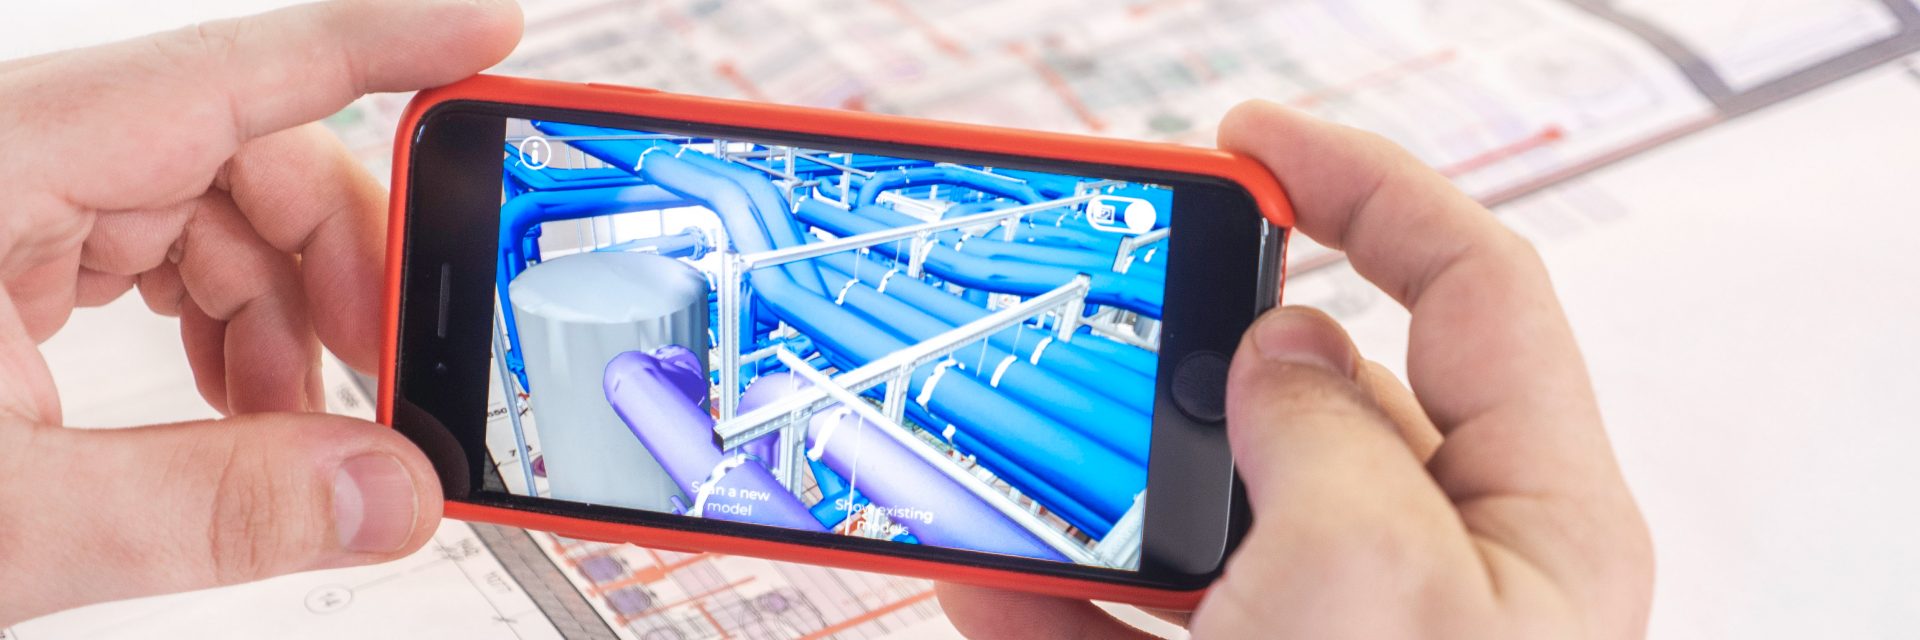 Internet of things transforming construction